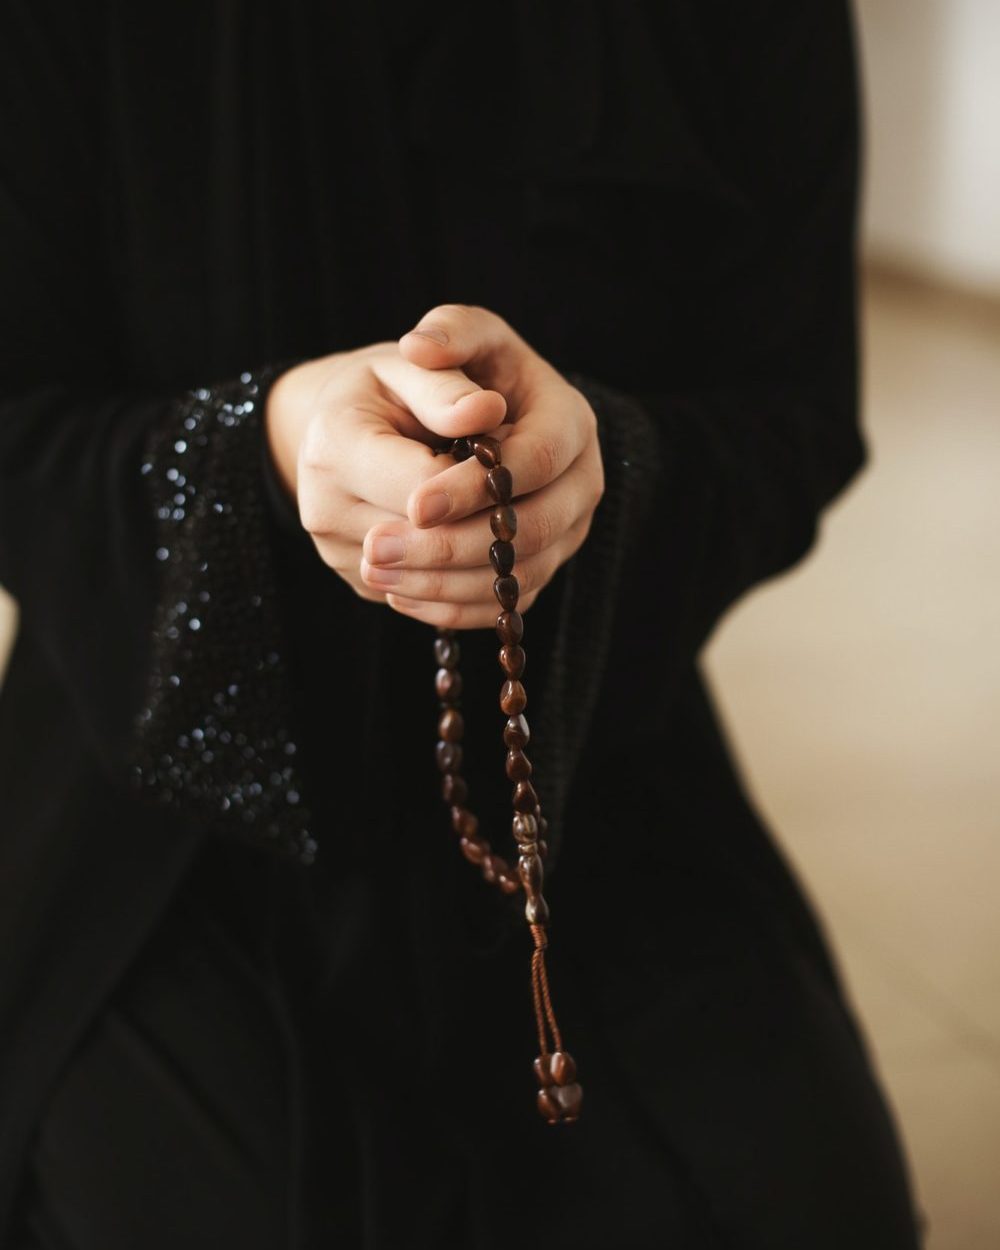 Prayer hands of a woman holding a rosary